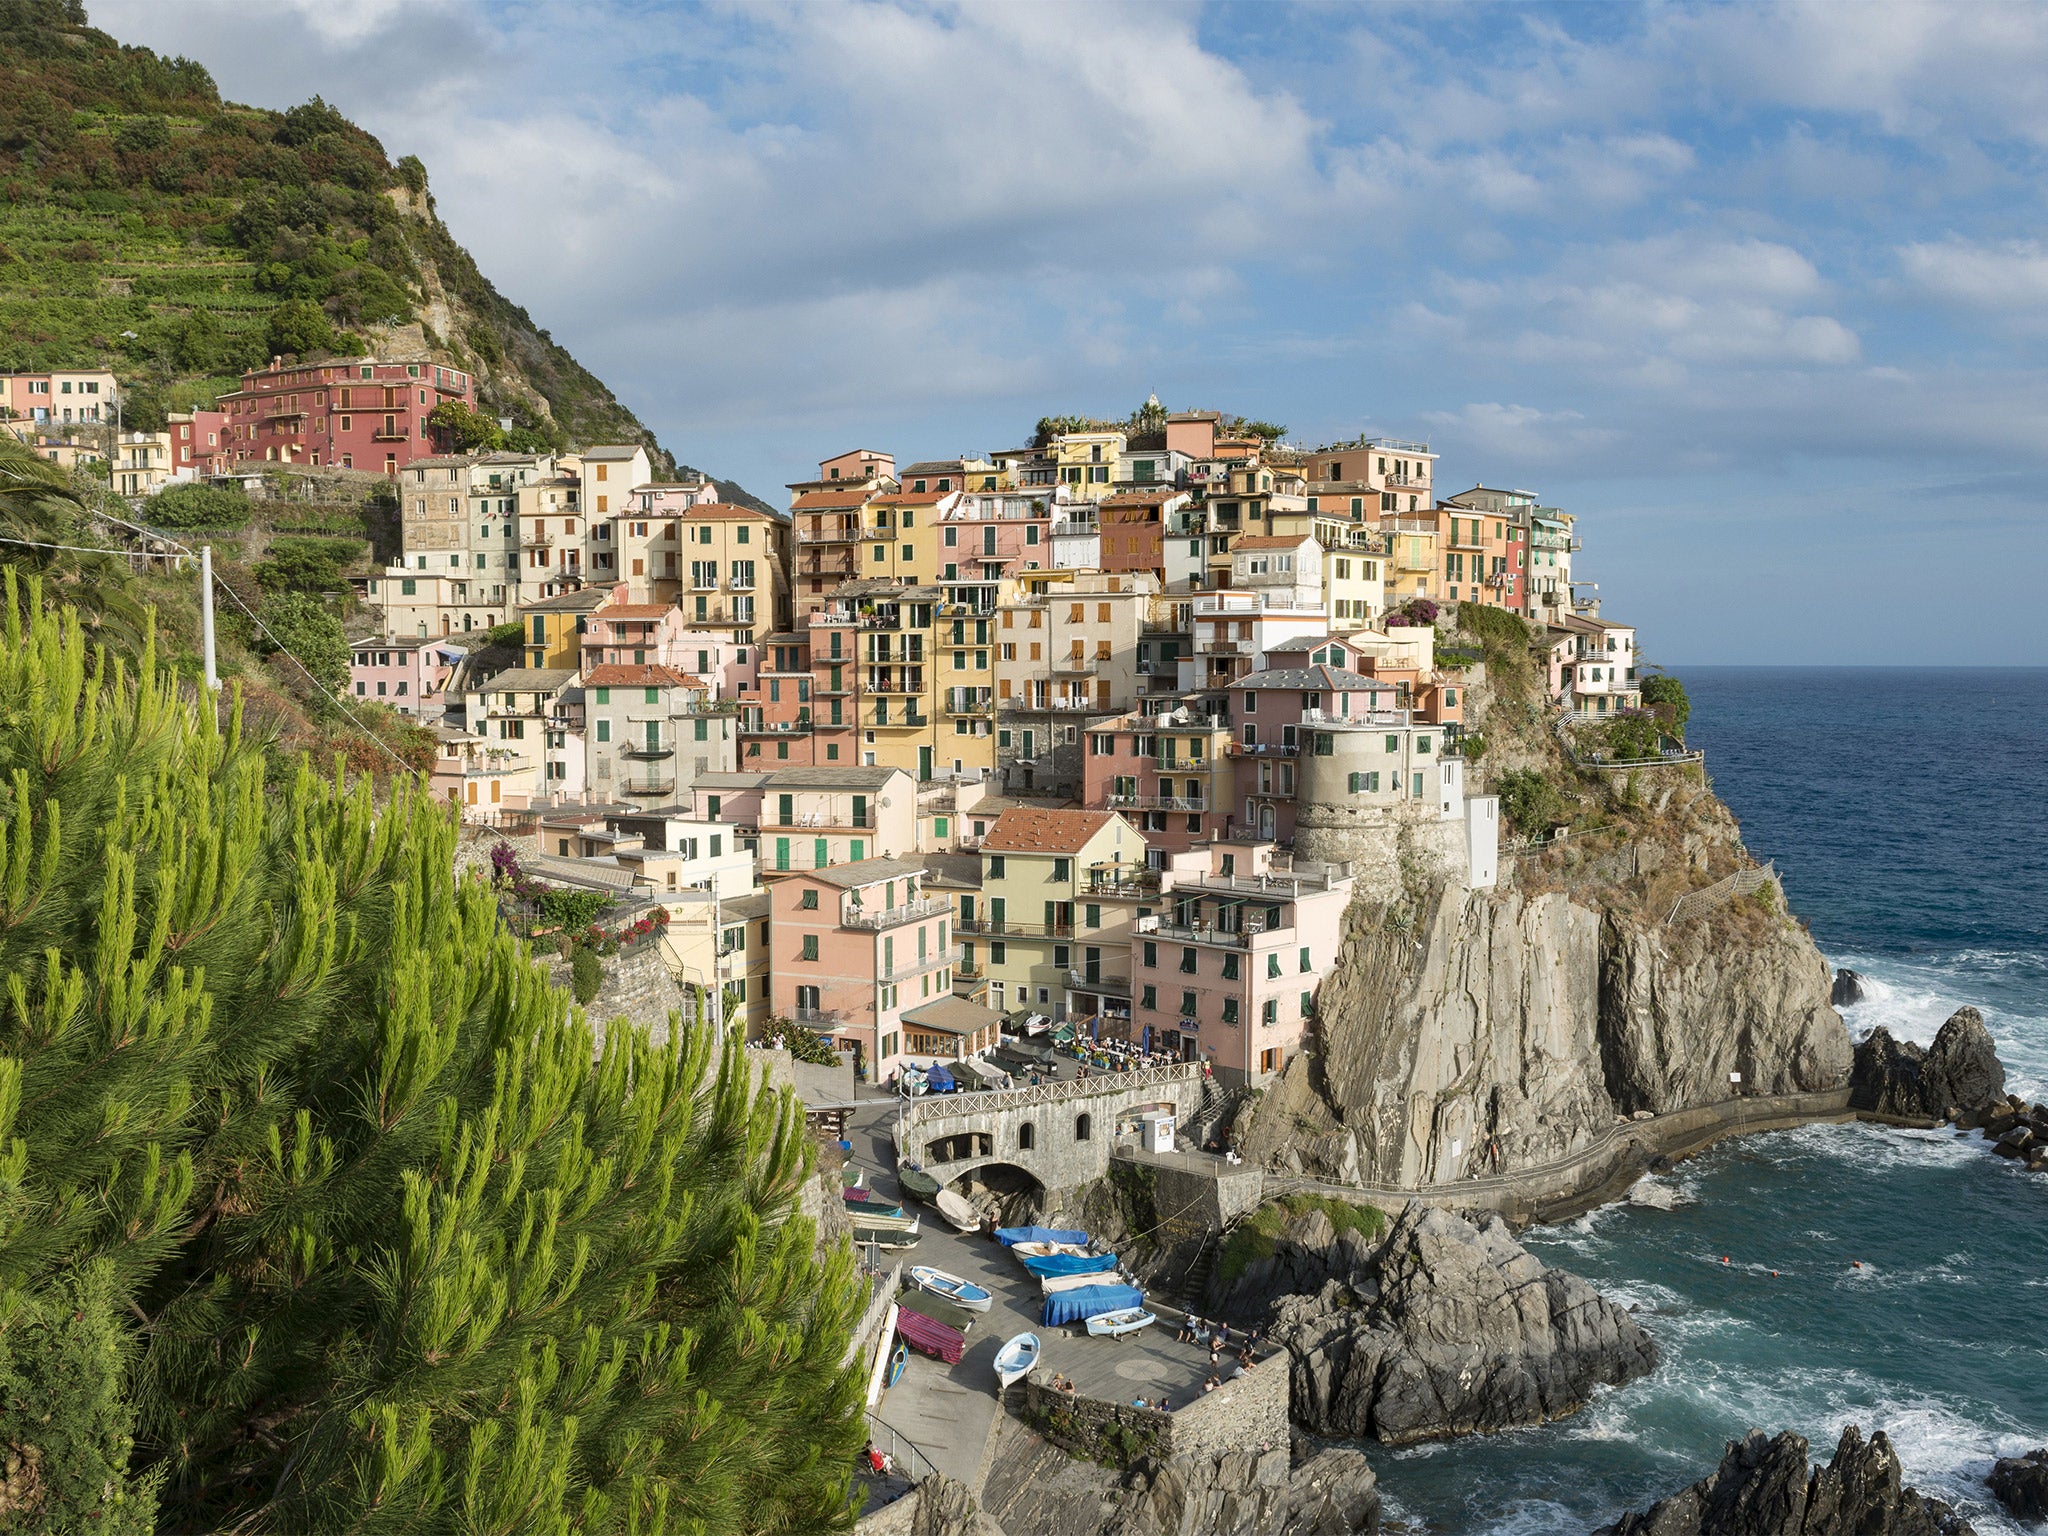 The visually spectacular coastline of Cinque Terre National Park in Liguria, Italy, is a Unesco World Heritage Site